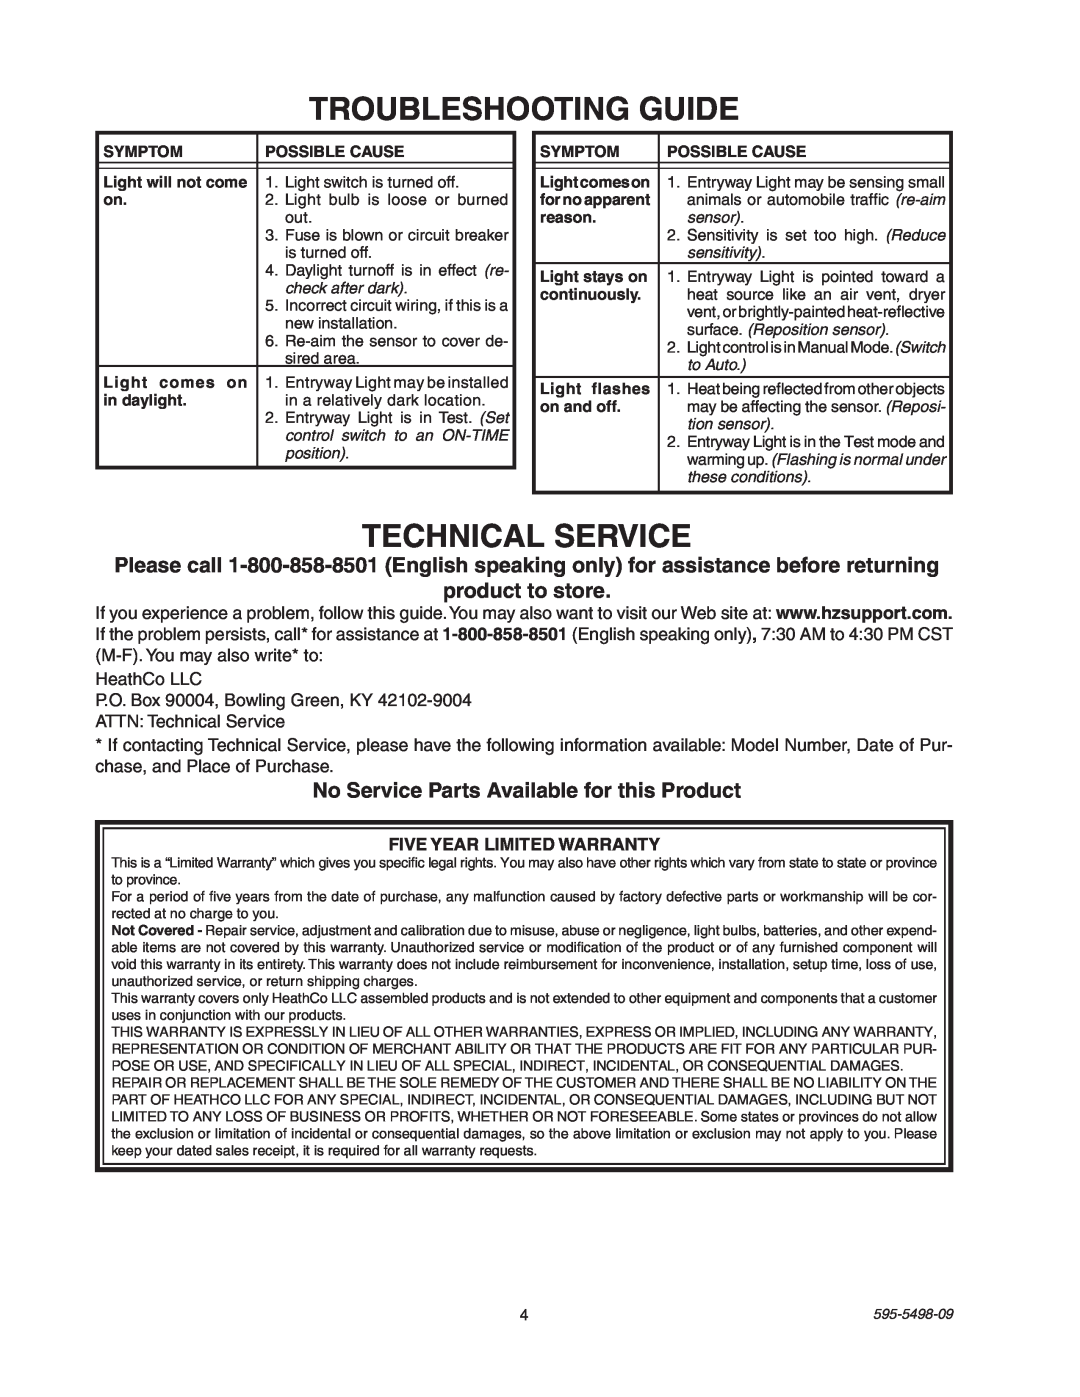 Heath Zenith SL-5610/15 manual Troubleshooting Guide, Technical Service, product to store 